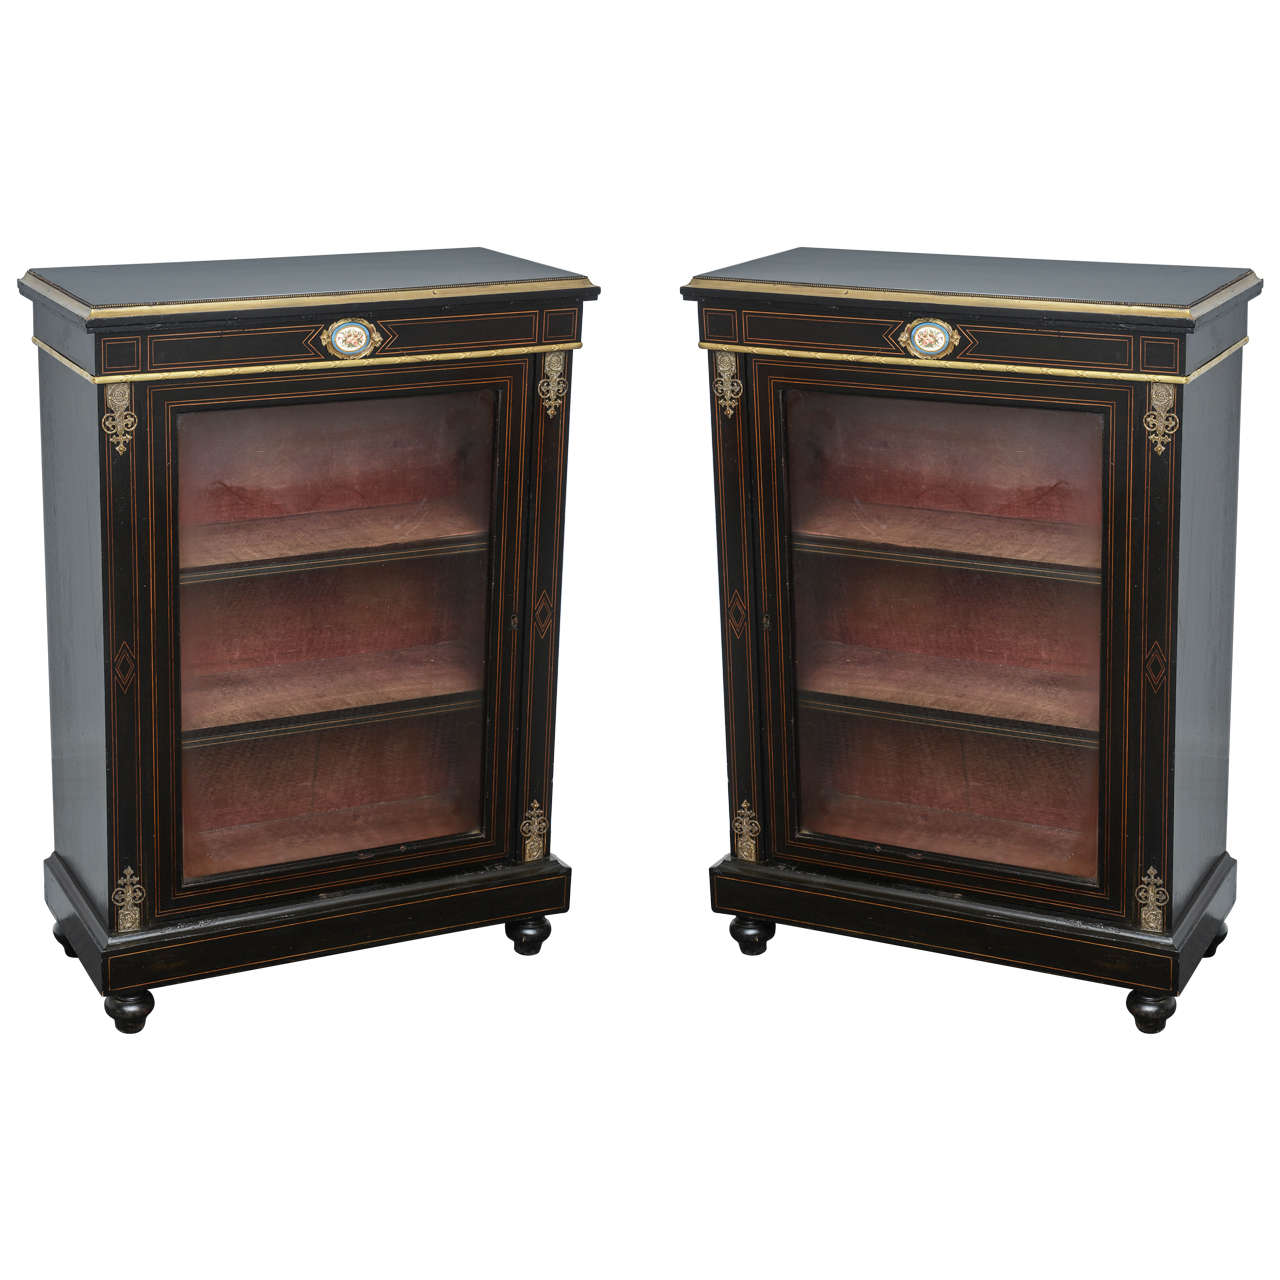 19th Century Pair of Black Ebony Cabinets with French Limoges Plaques